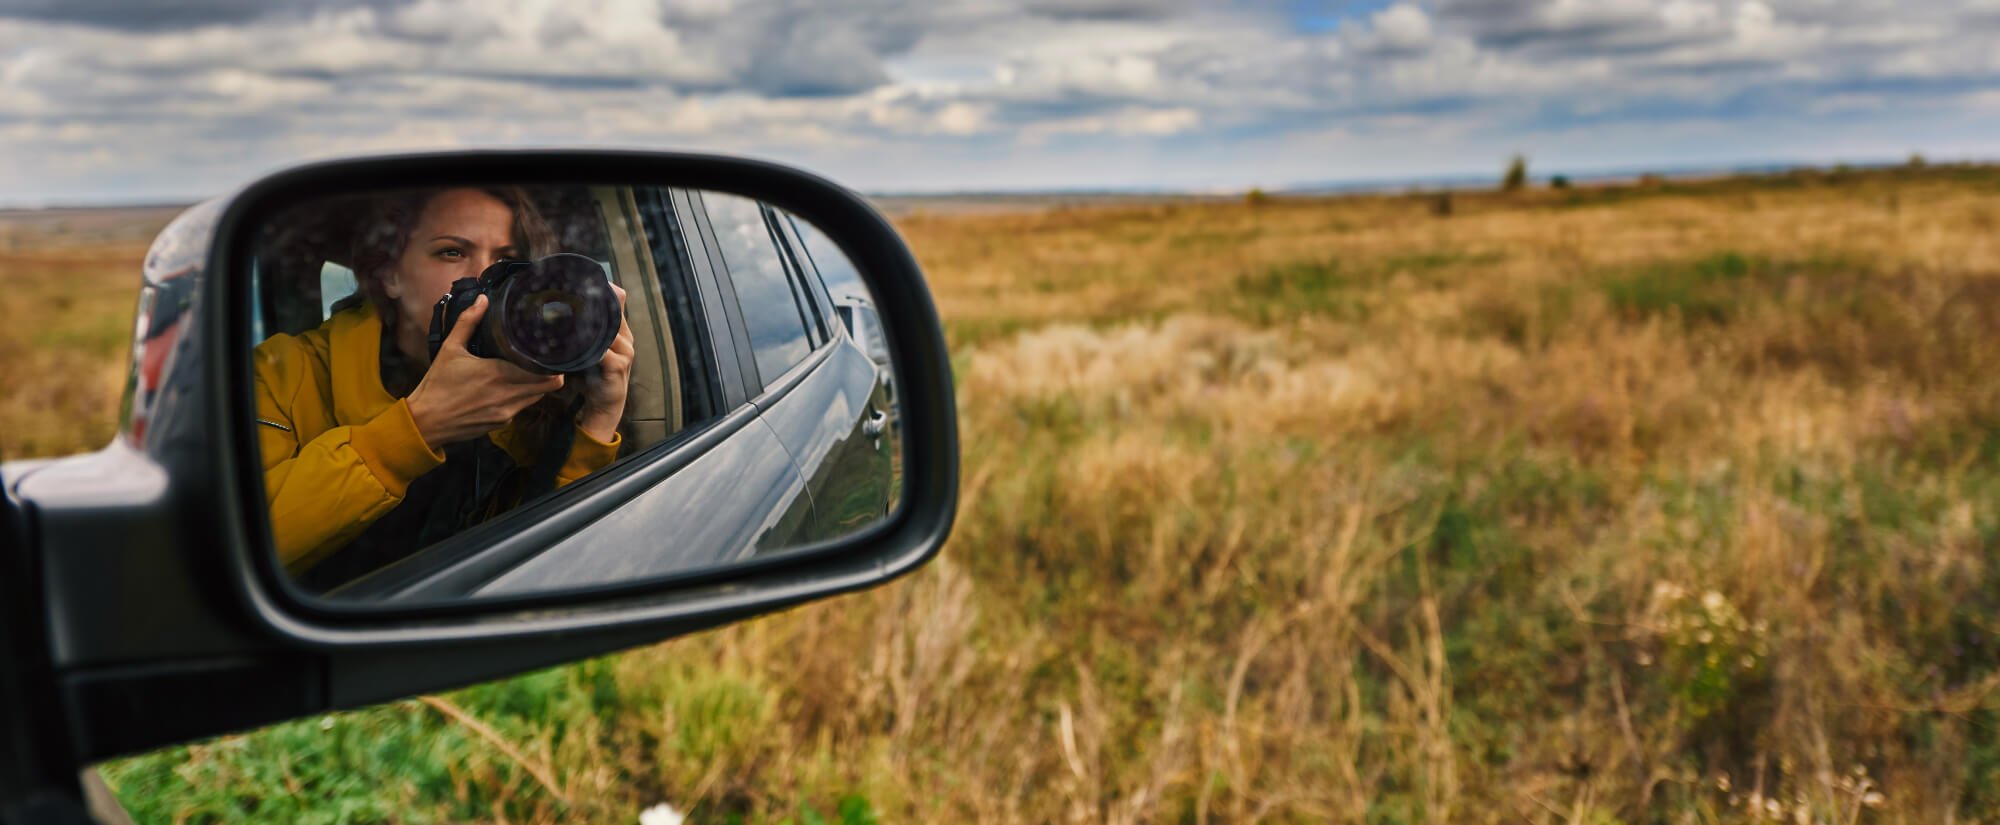 a person in a car looking at a side mirror